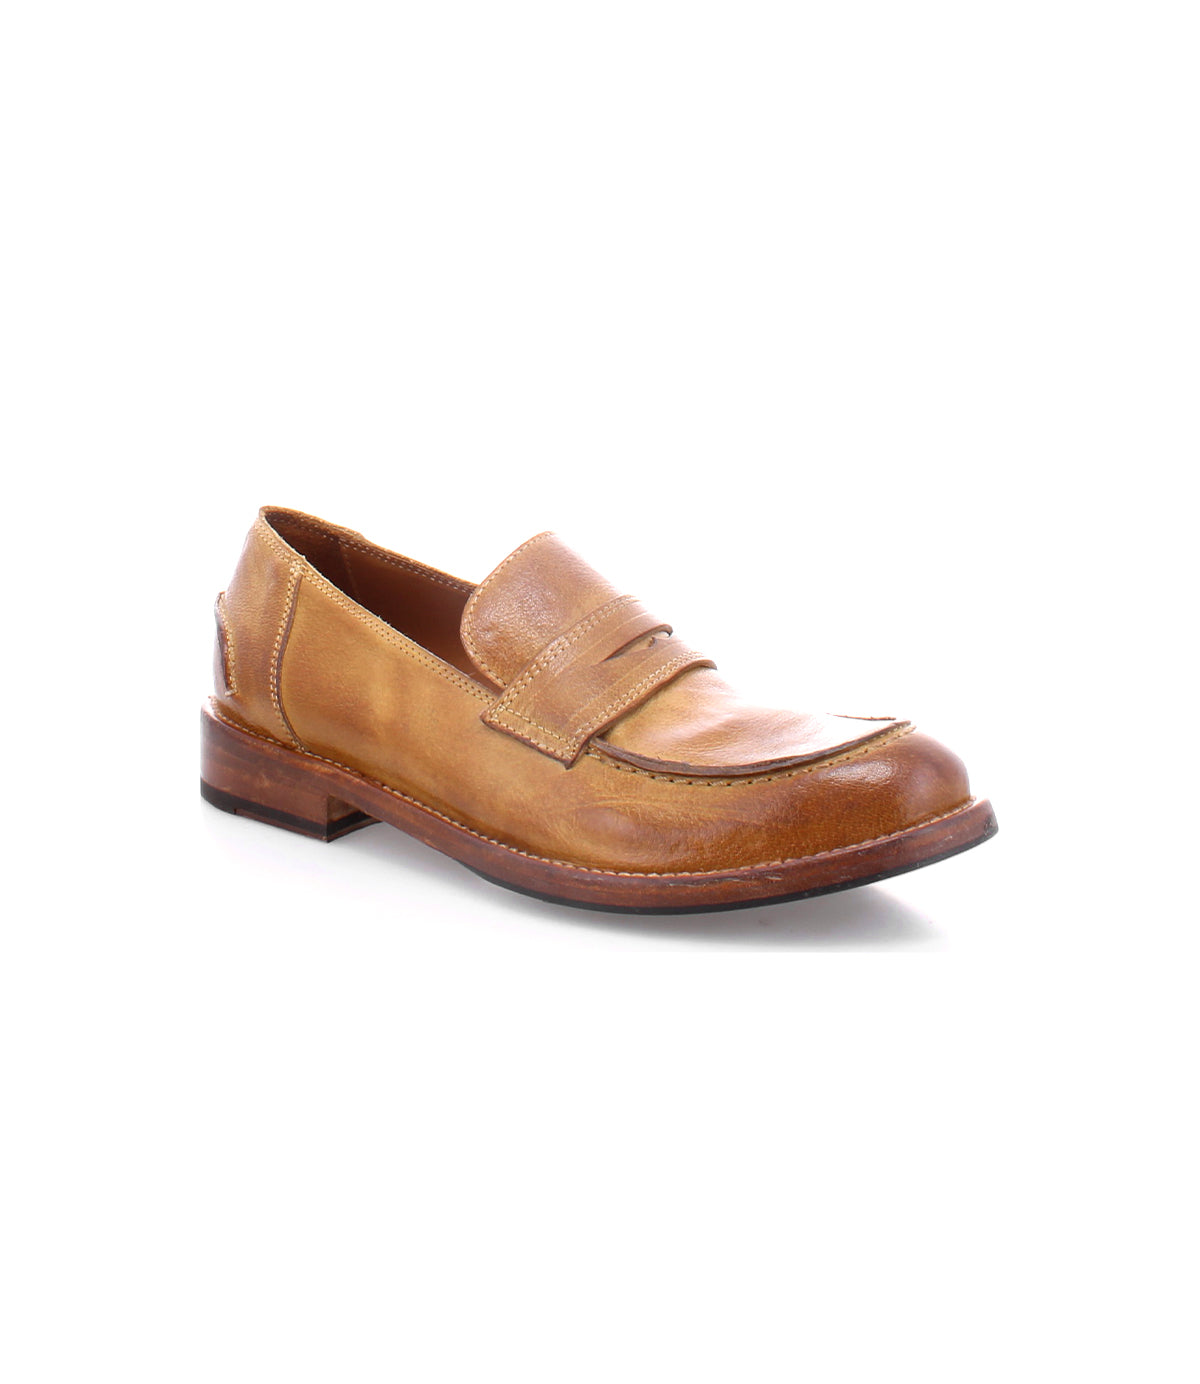 A men's tan penny loafer made with Italian leather called Bonus by Bed Stu.